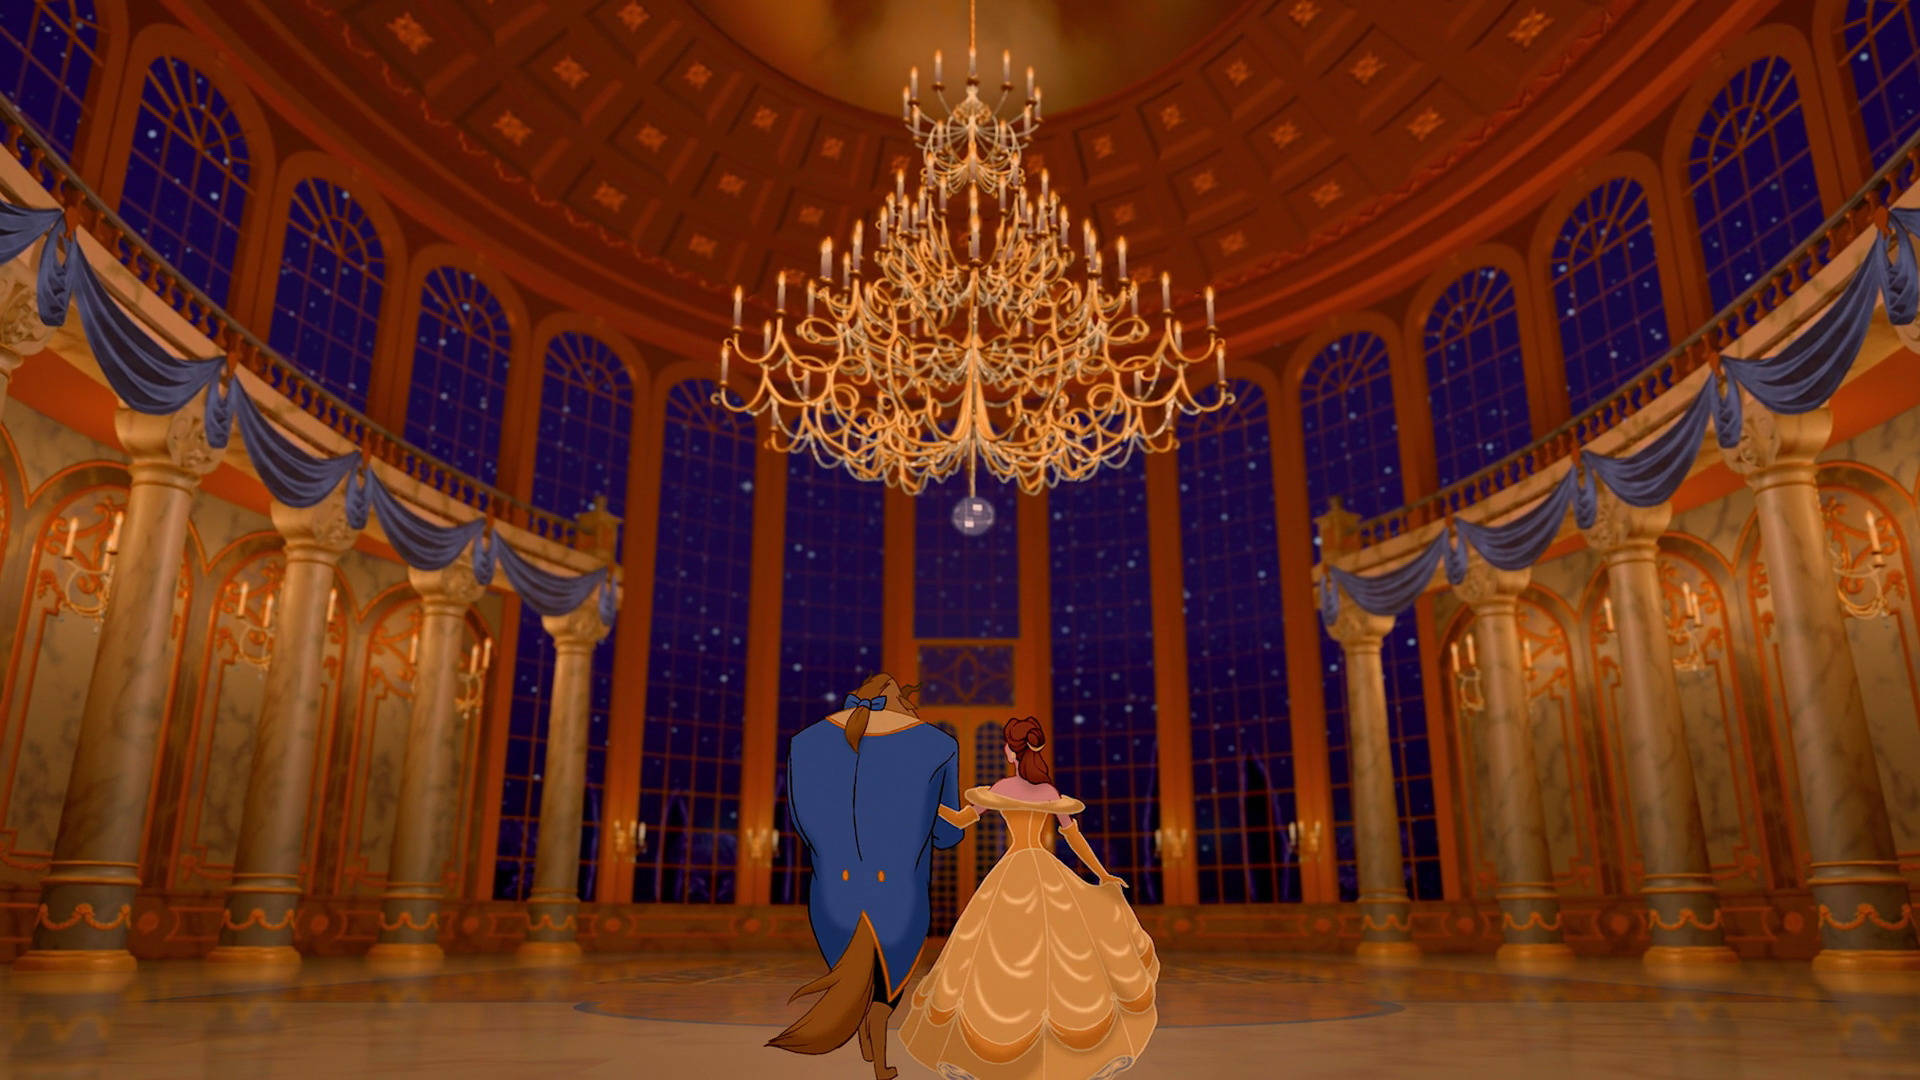 Belle And Beast In Ballroom